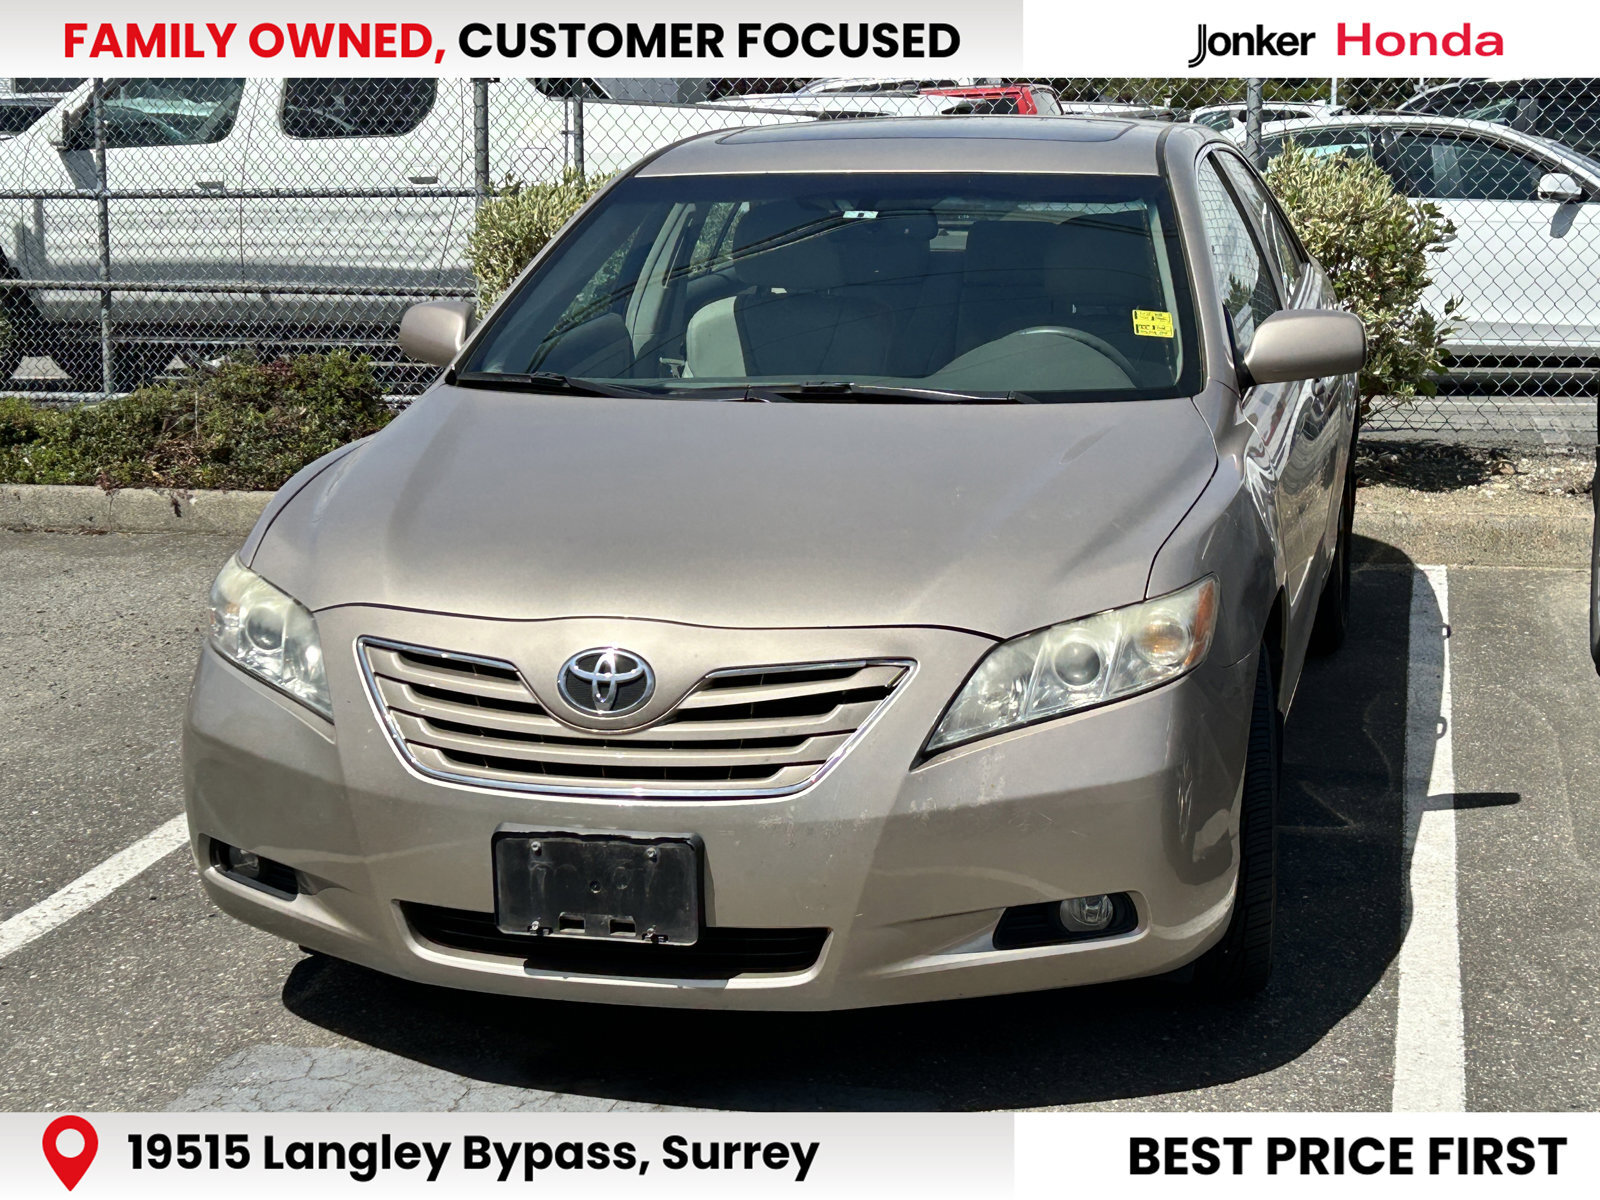 2007 Toyota Camry Low Km's, Local Car. 